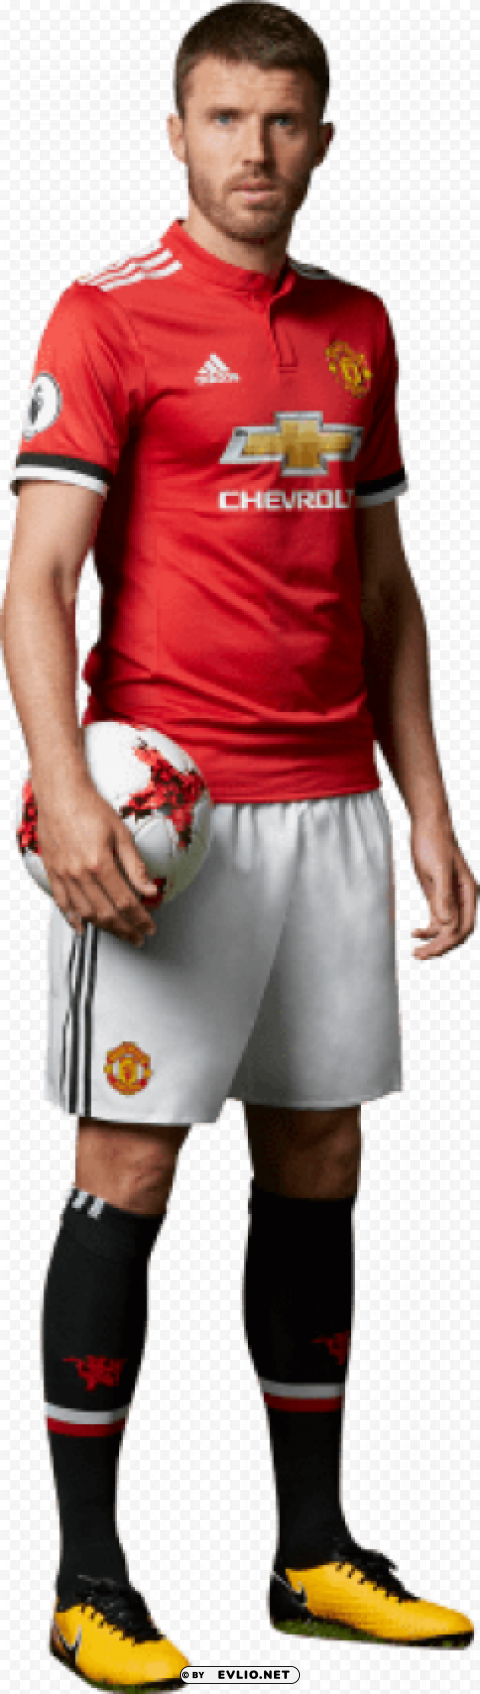 michael carrick PNG images free download transparent background